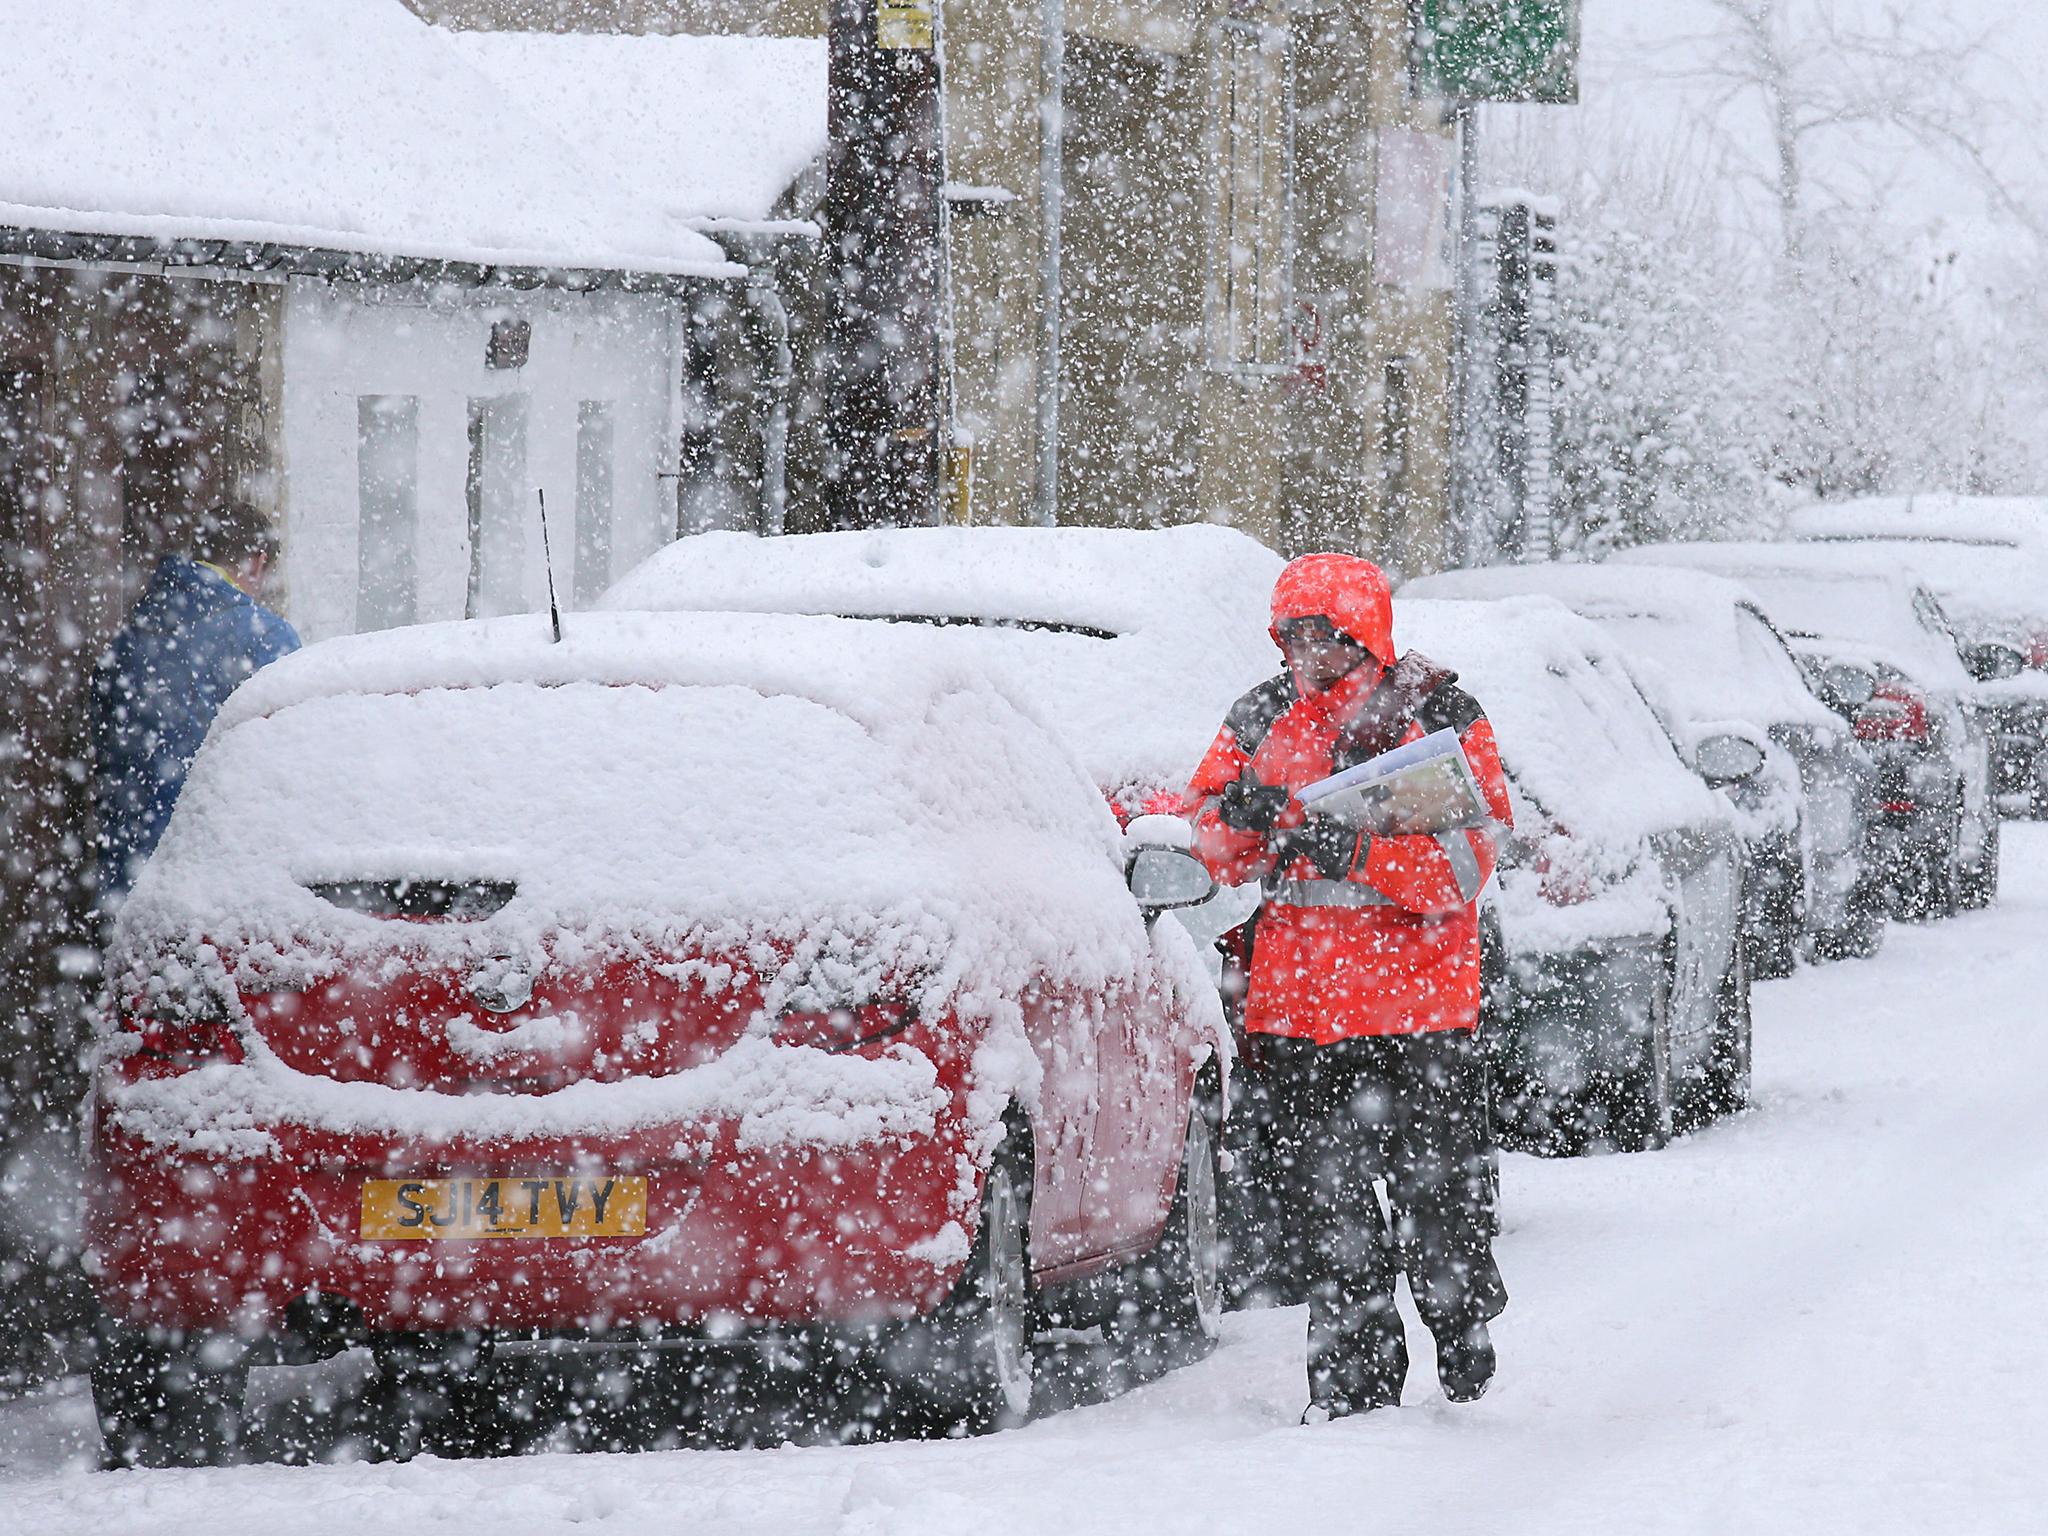 UK weather latest: Travel chaos grips Britain as snow, rain and hurricane-force winds hit